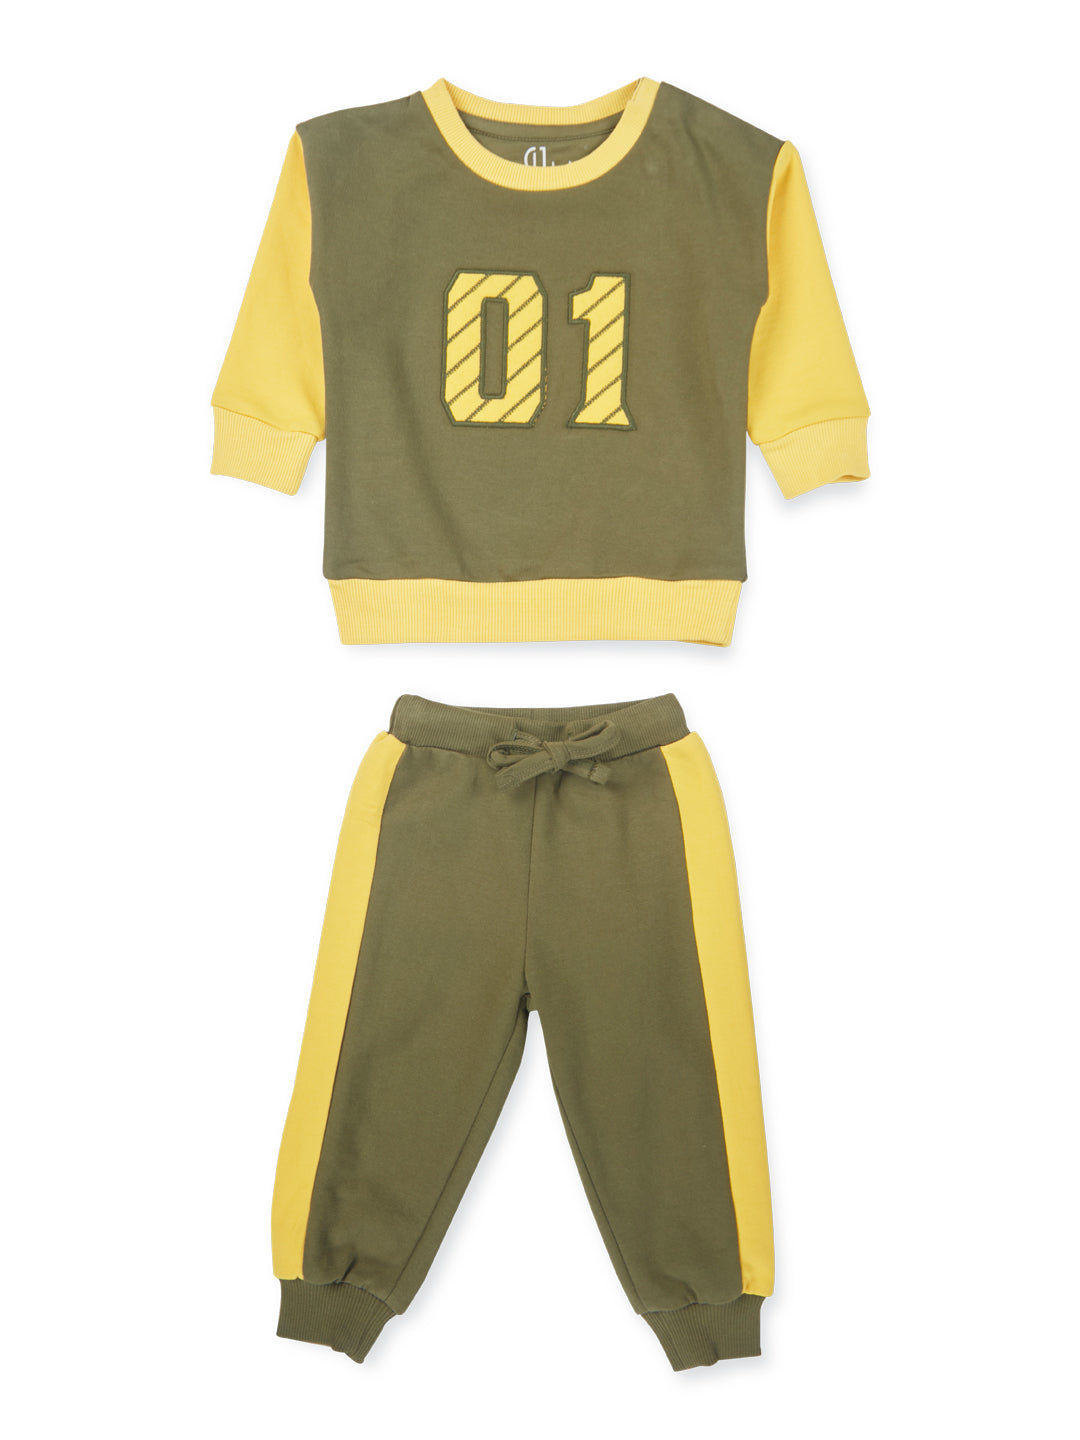 Baby Boys Set of Green round neck knitted cotton t-shirt and pajamas.